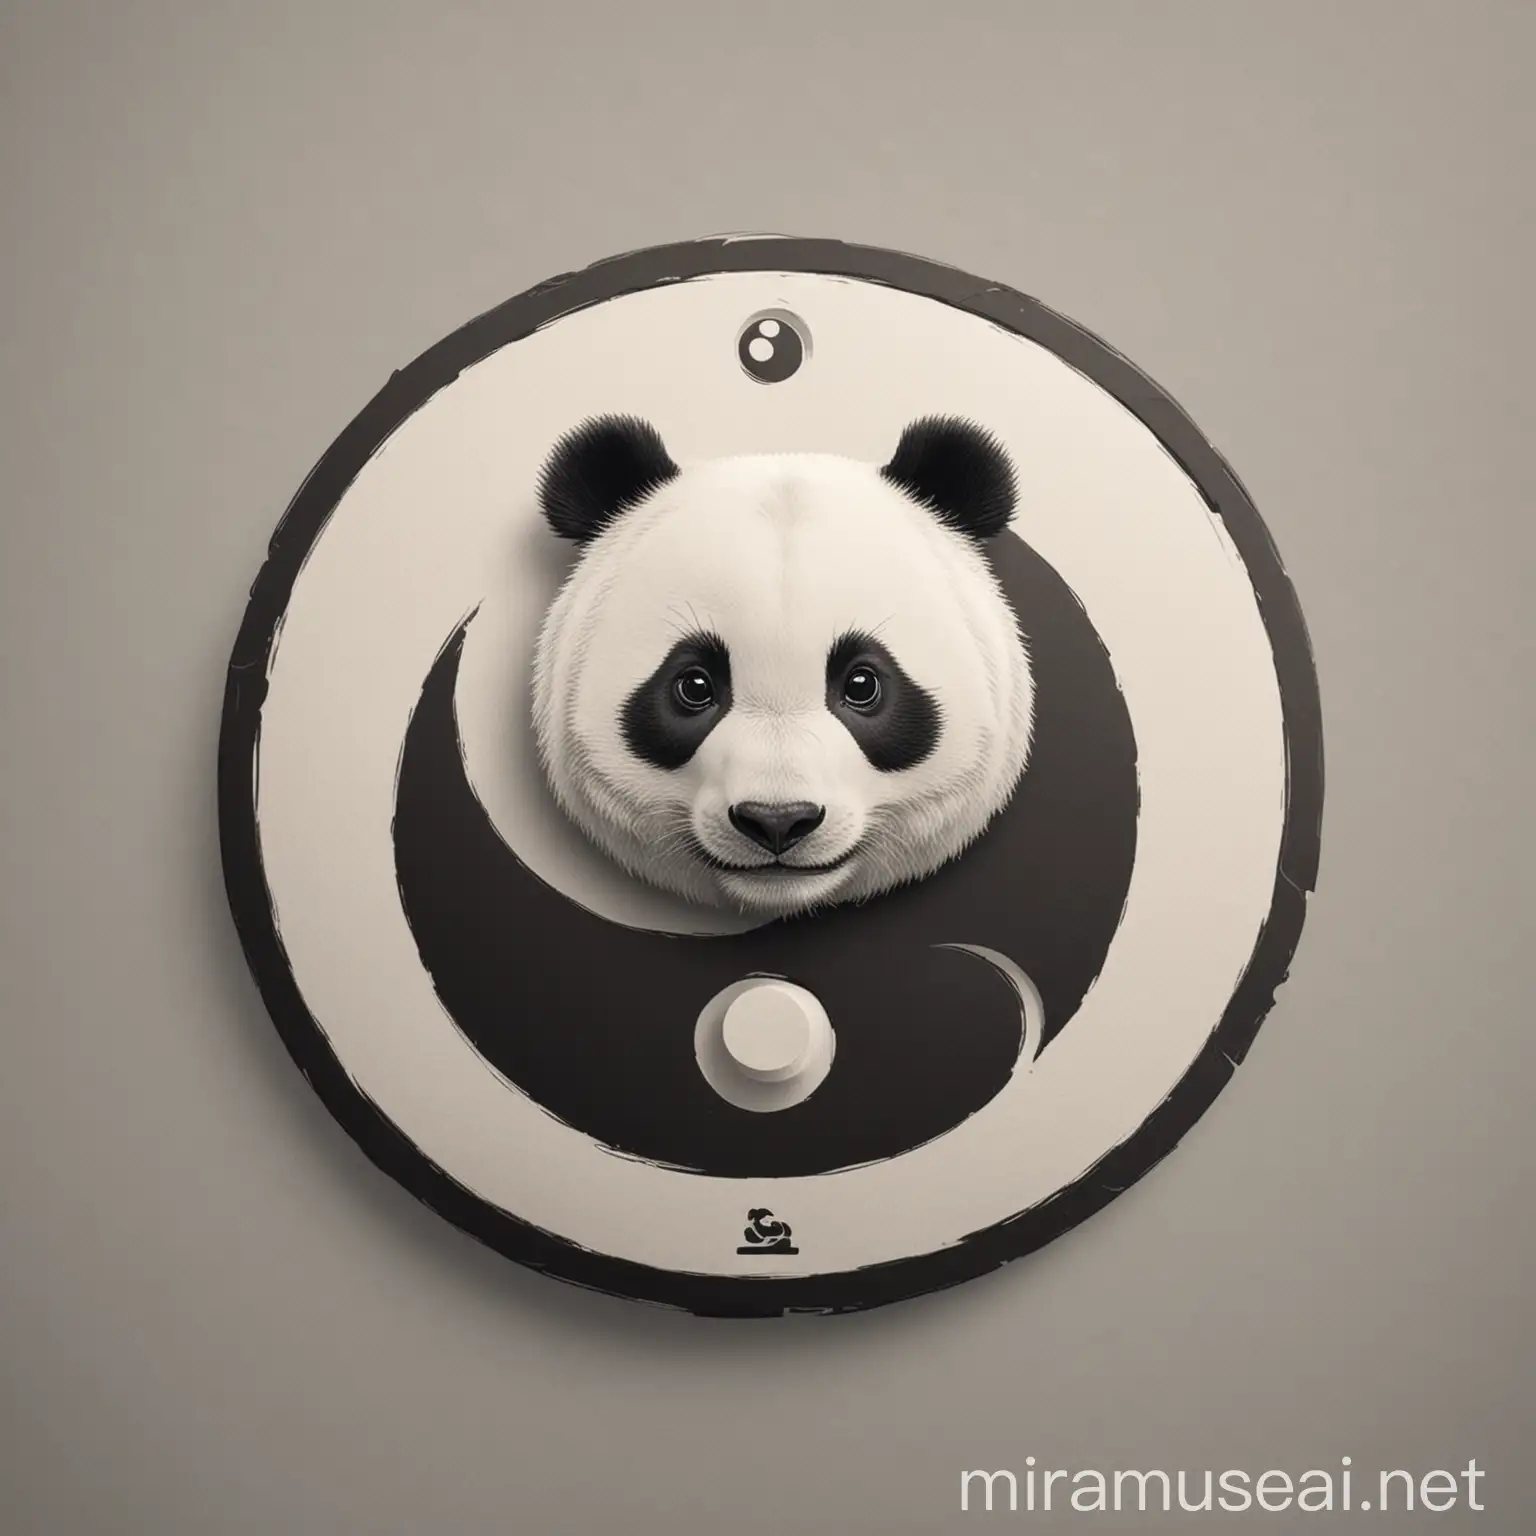 create a circular logo which contains a fusion of ying yang and panda.